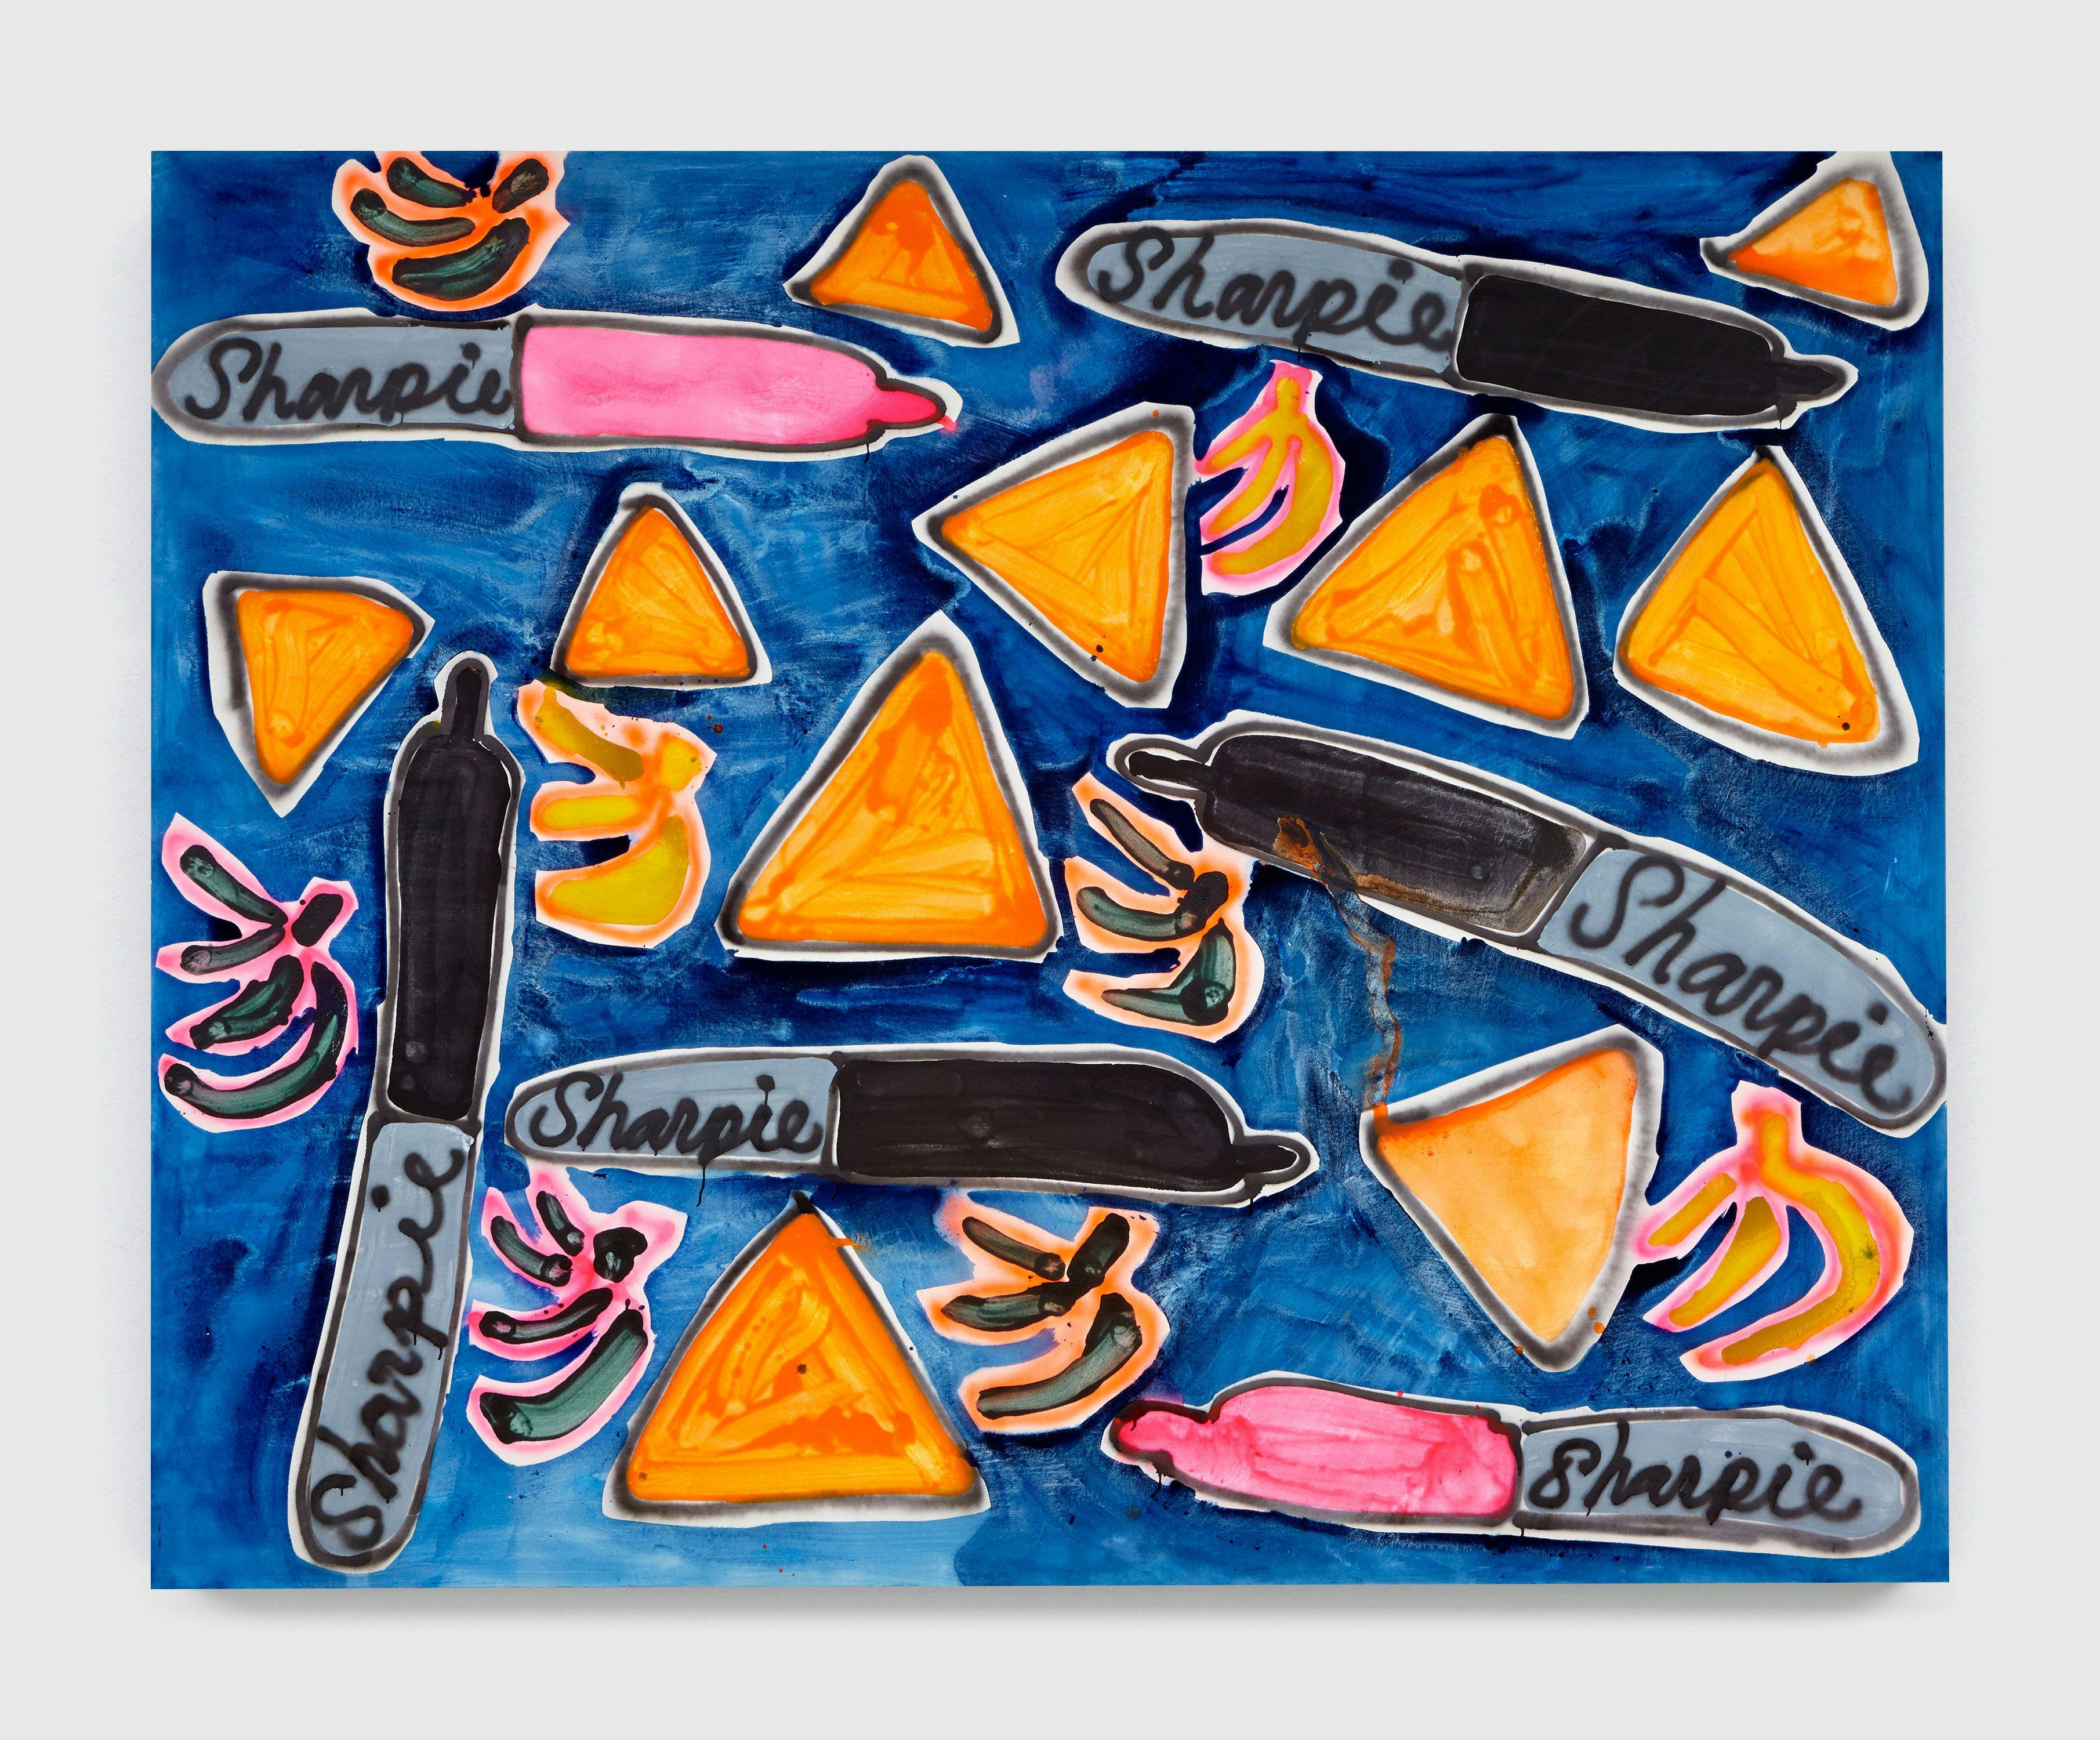 A painting by Katherine Bernhardt, titled Plantains + Bananas + Doritos + Sharpies, dated 2015.